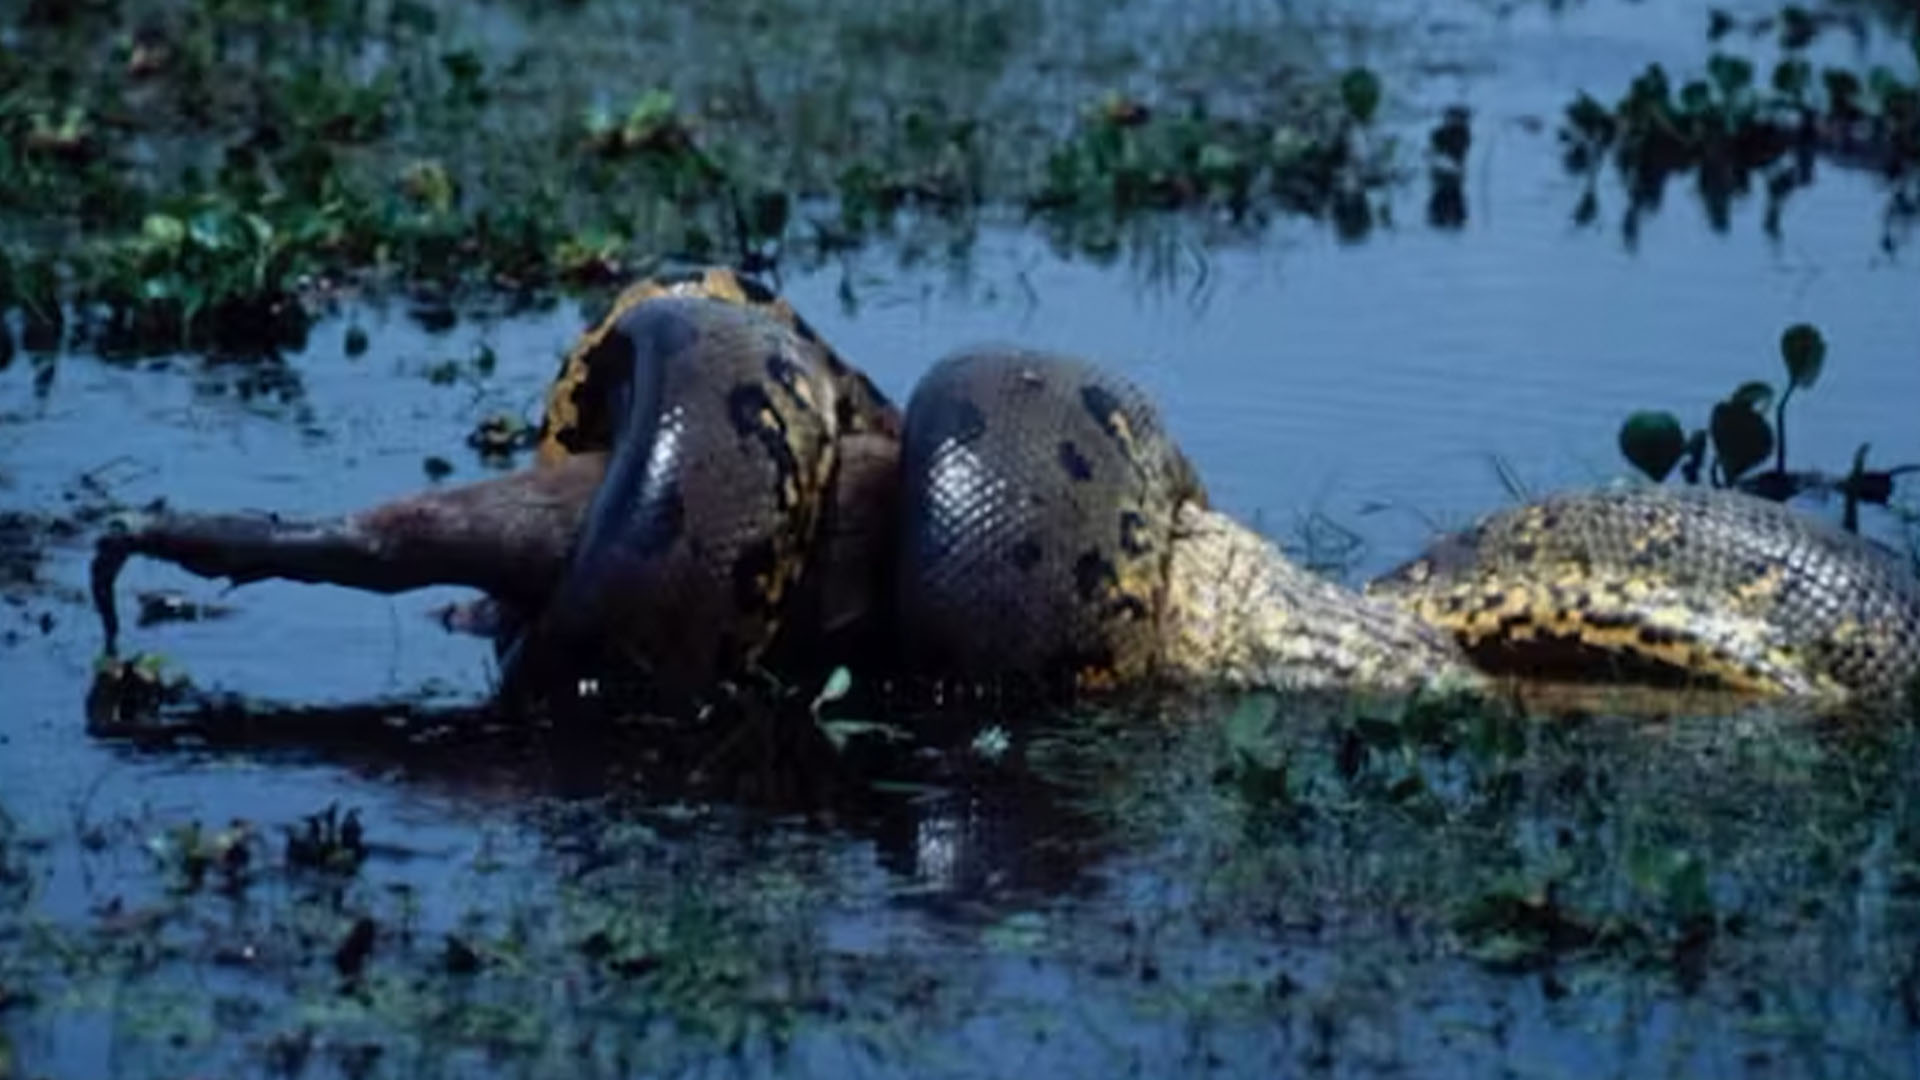 Green anaconda have large, flexible jaws. Pictured: a green anaconda eating a deer.